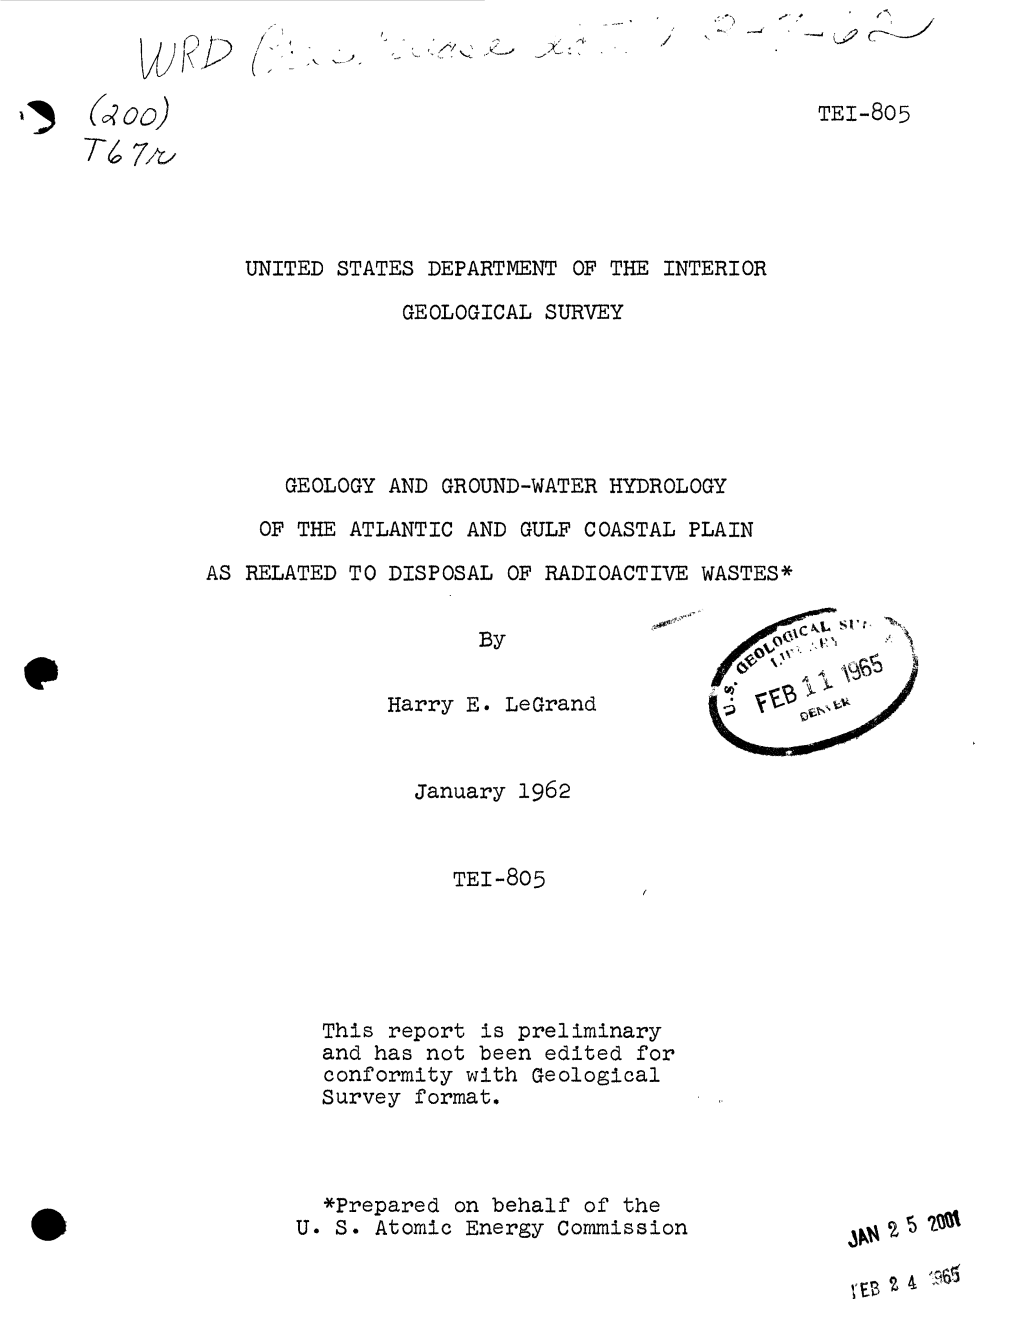 By Harry E. Legrand January 1962 TEI-805 This Report Is Preliminary